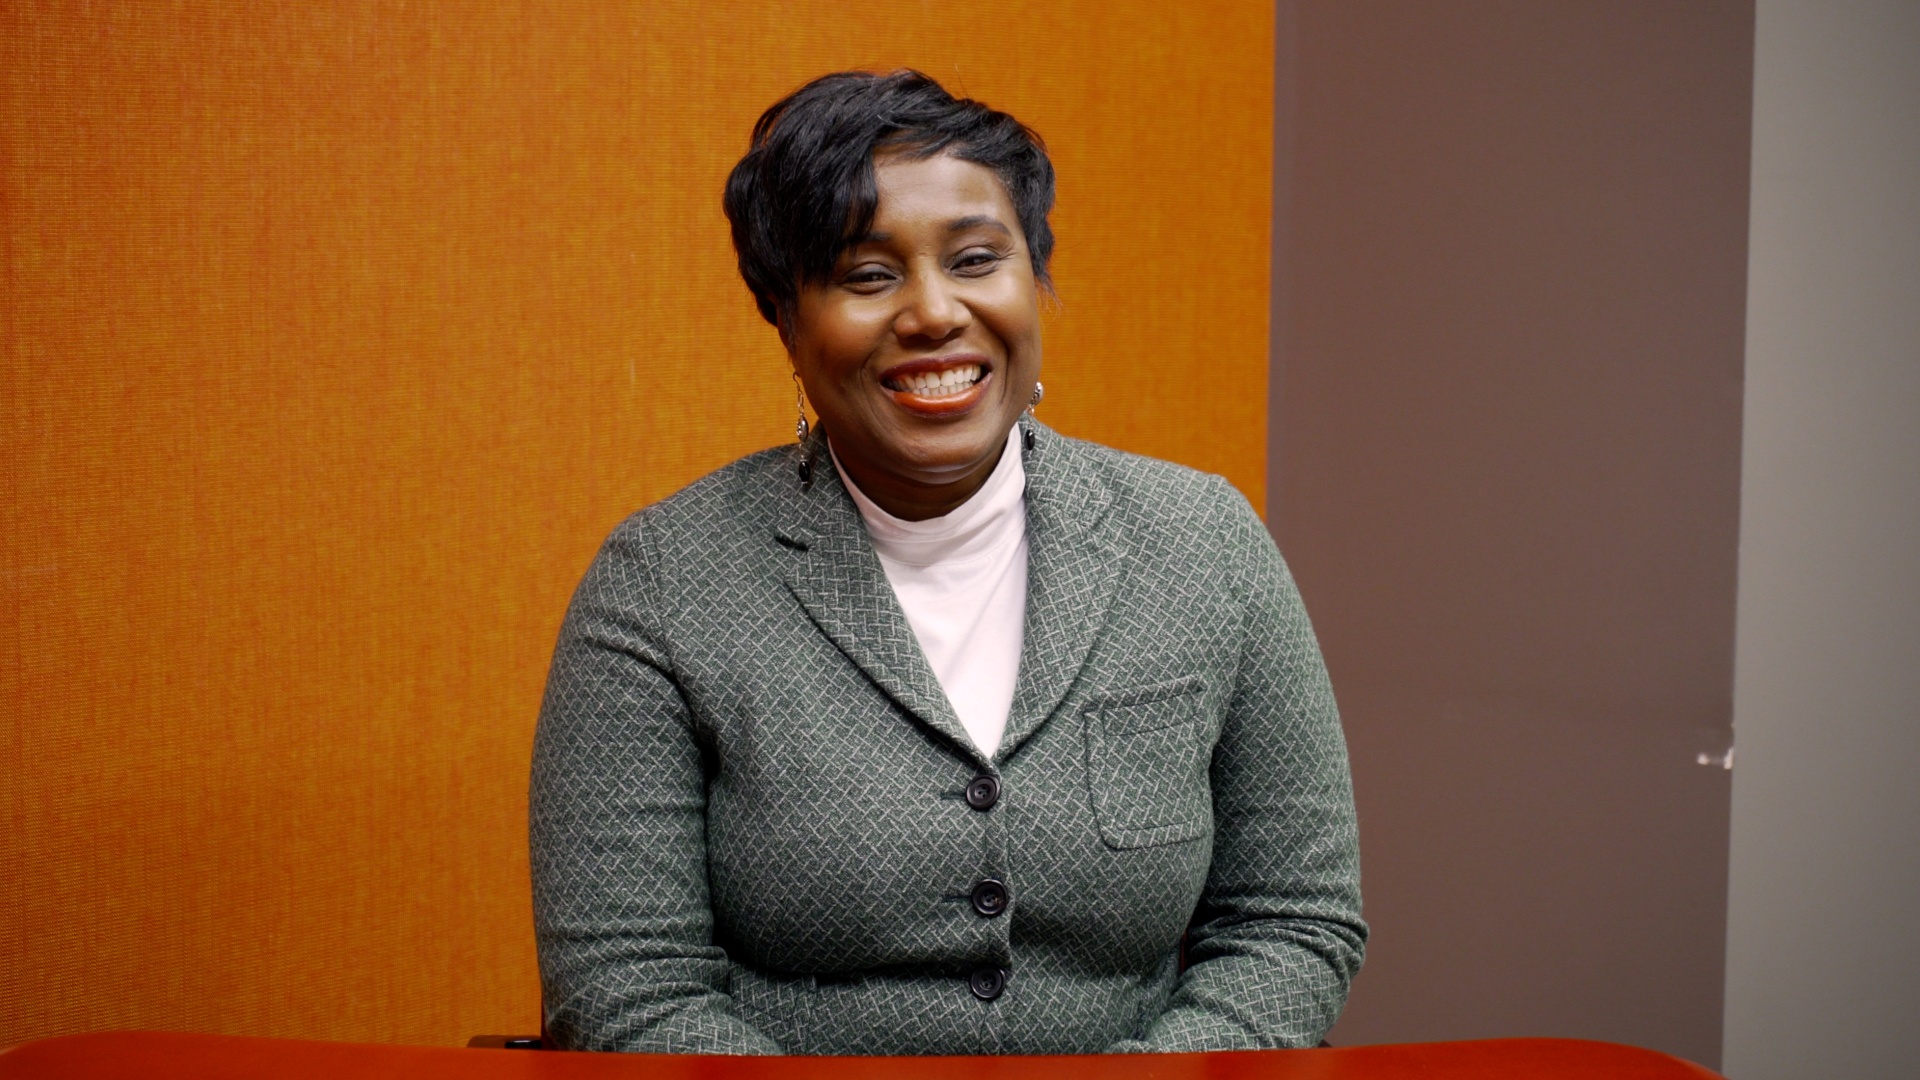 Dudley Corp Ceo Ursula Dudley Oglesby Discusses Continuing Her Parents Legacy Rolling Out